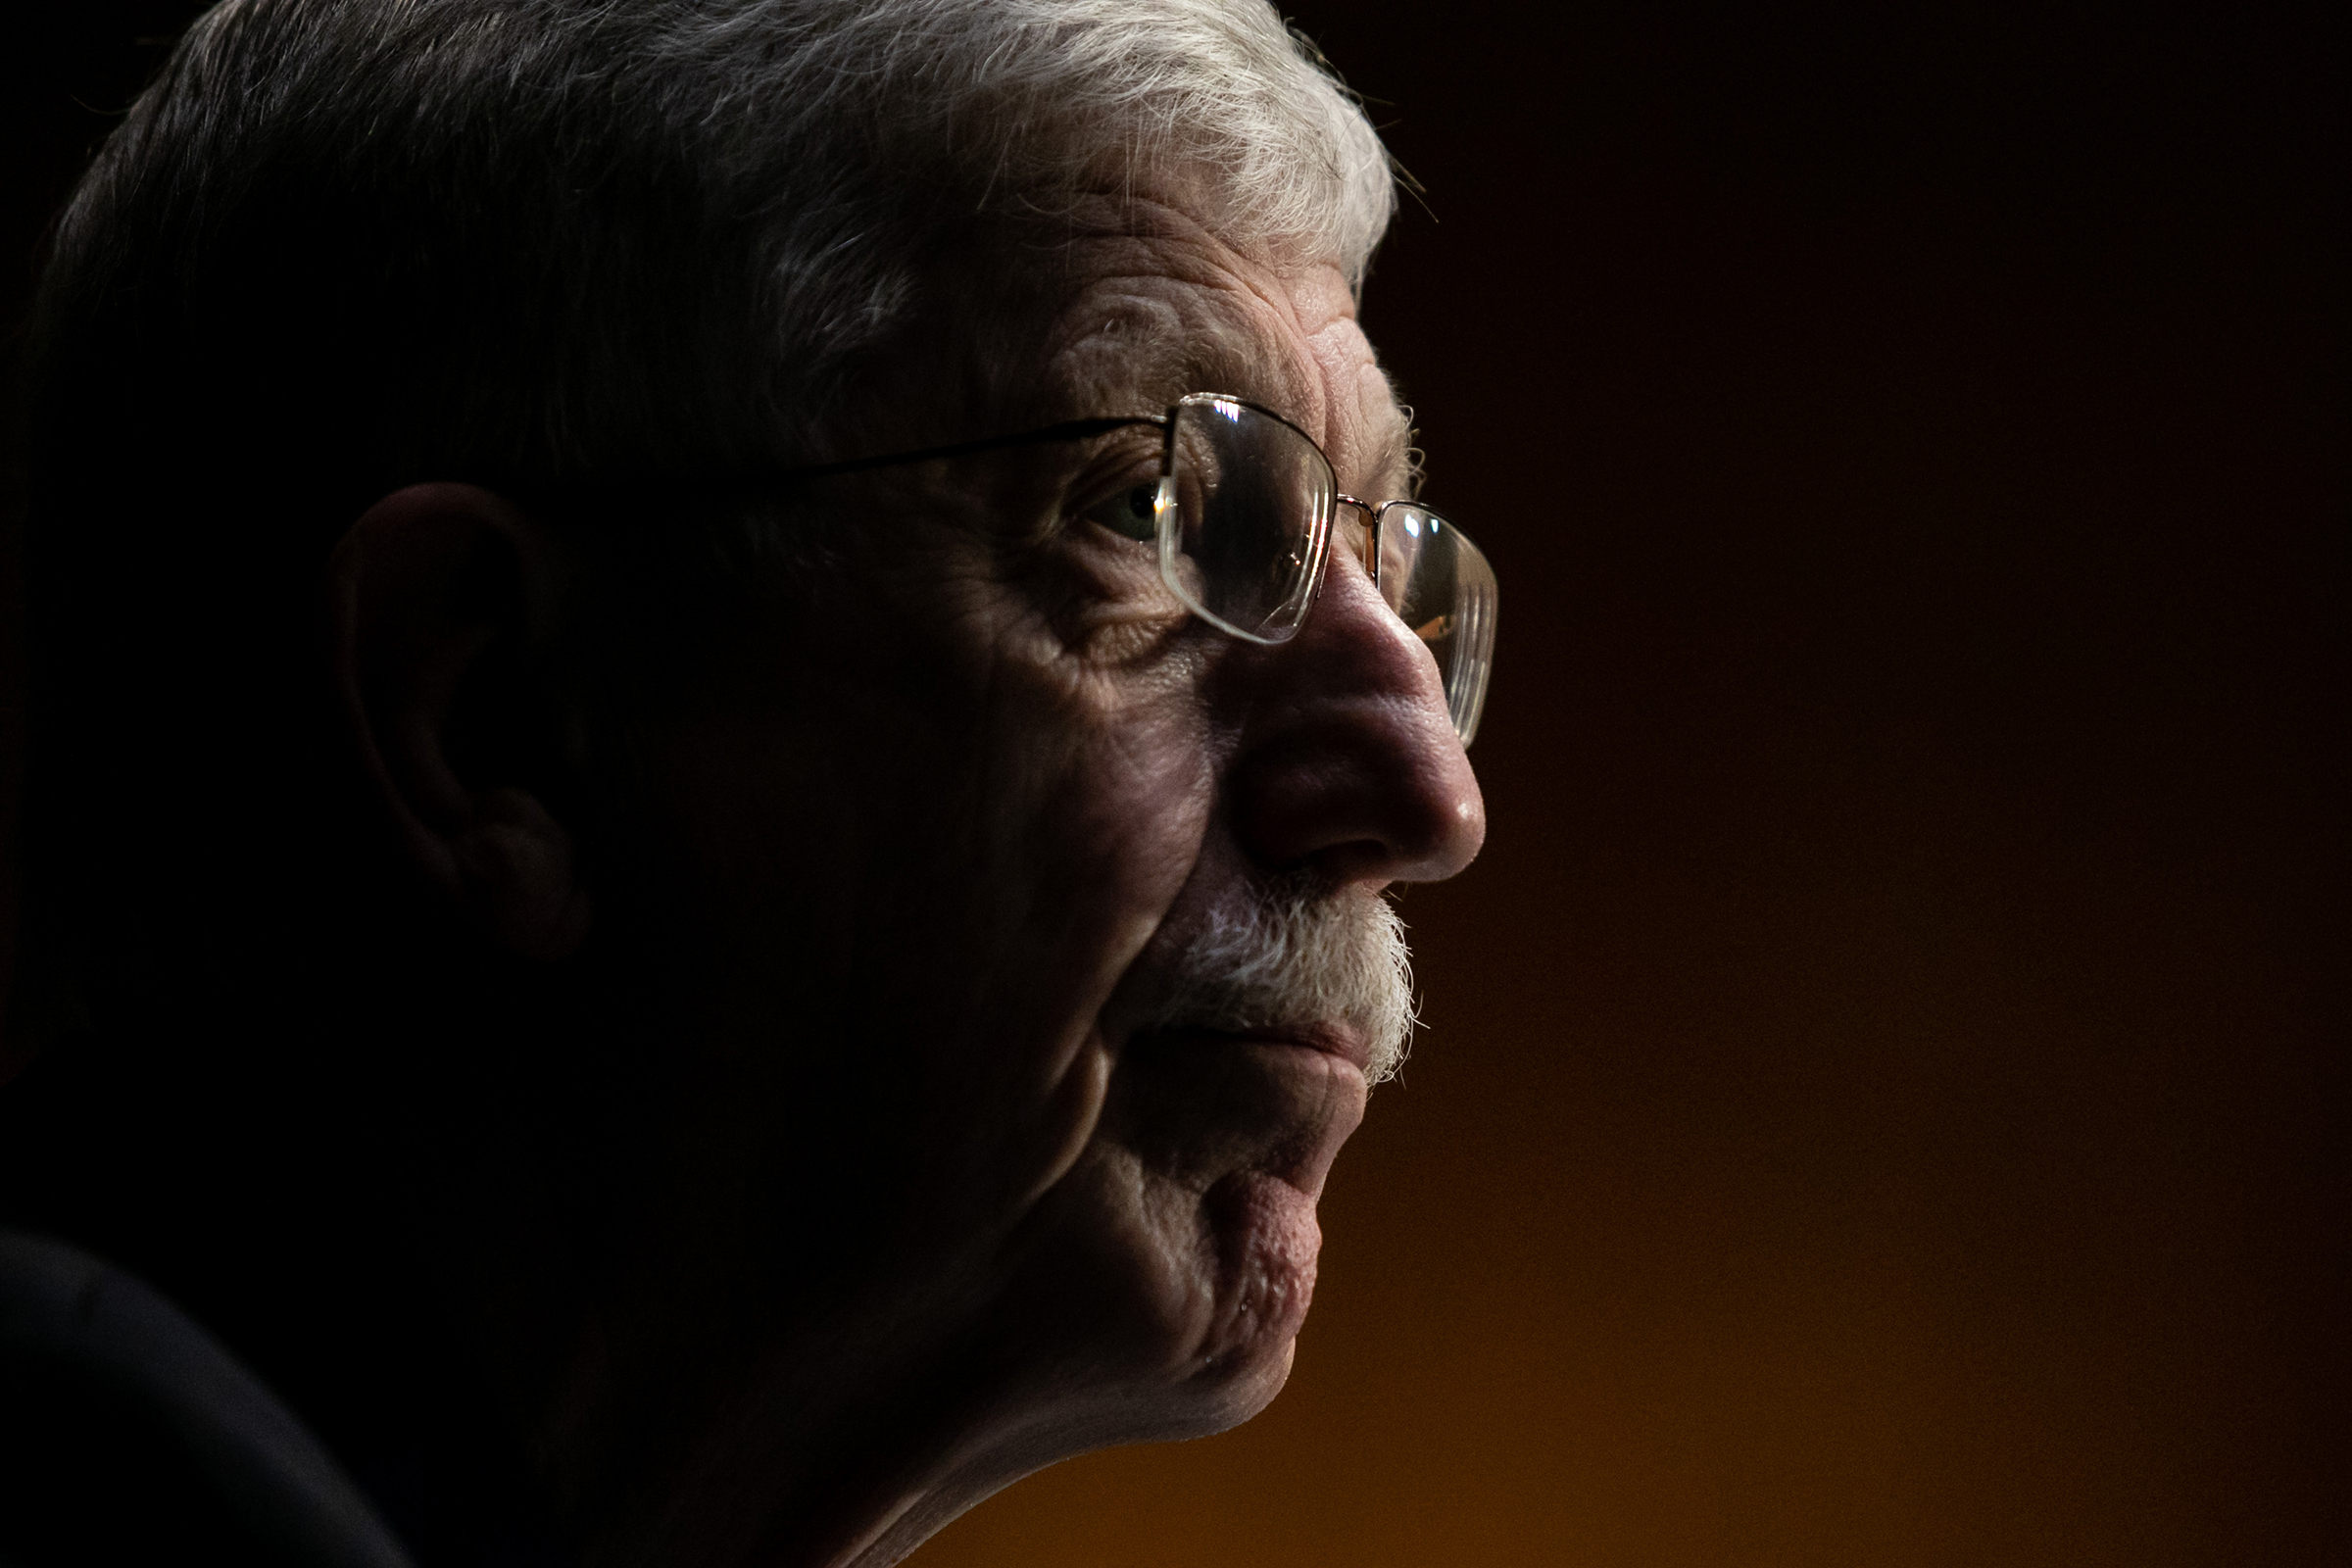 National Health Institute Director Francis S. Collins testifies at a Senate Labor, Health and Human Services, Education and Related Agencies Subcommittee hearing on manufacturing a Coronavirus vaccine on Capitol Hill on July 2, 2020 in Washington, DC. (Graeme Jennings—Getty Images)